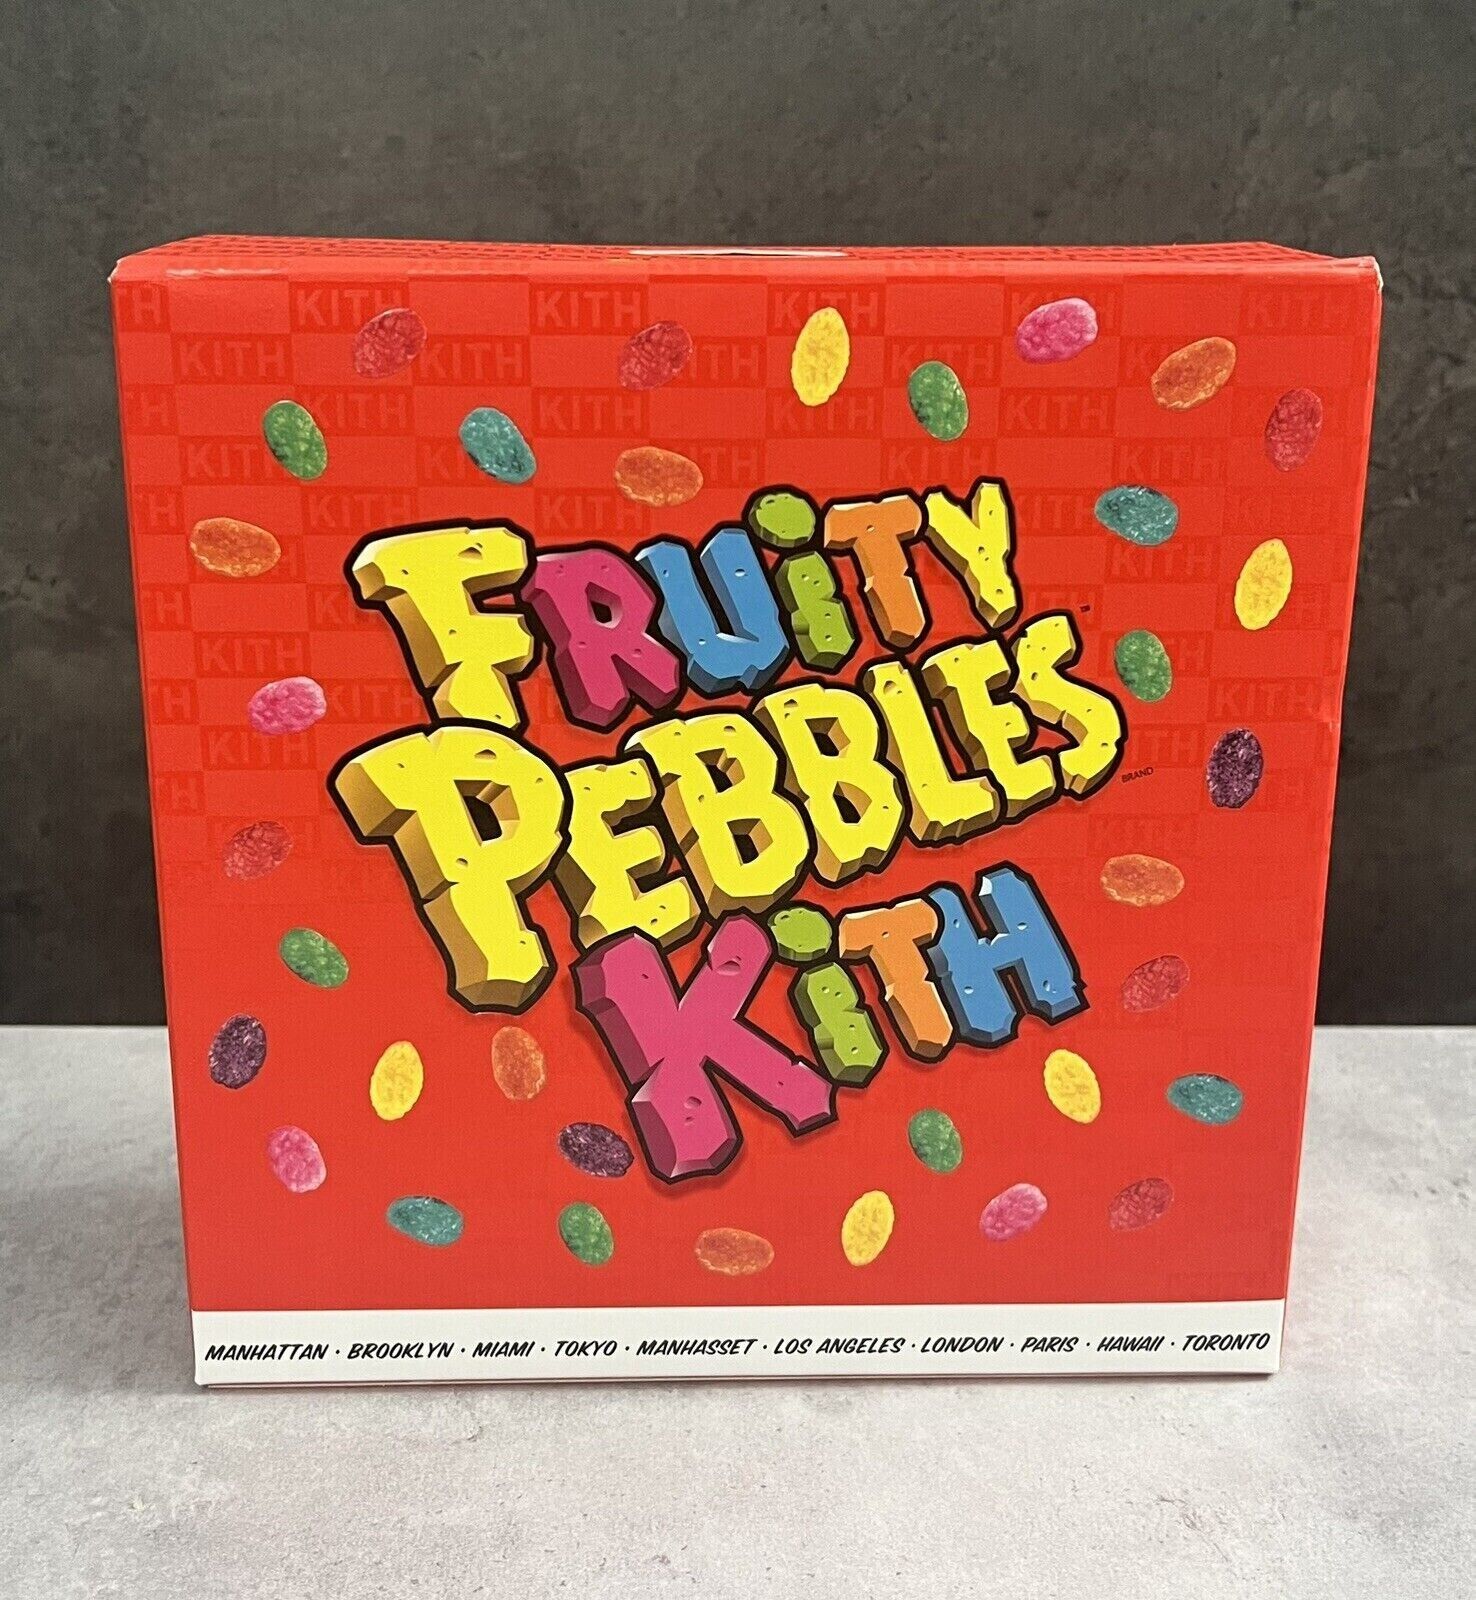 Kith Treats For Fruity Pebbles Cereal Bowl Authentic Limited Edition IN HAND